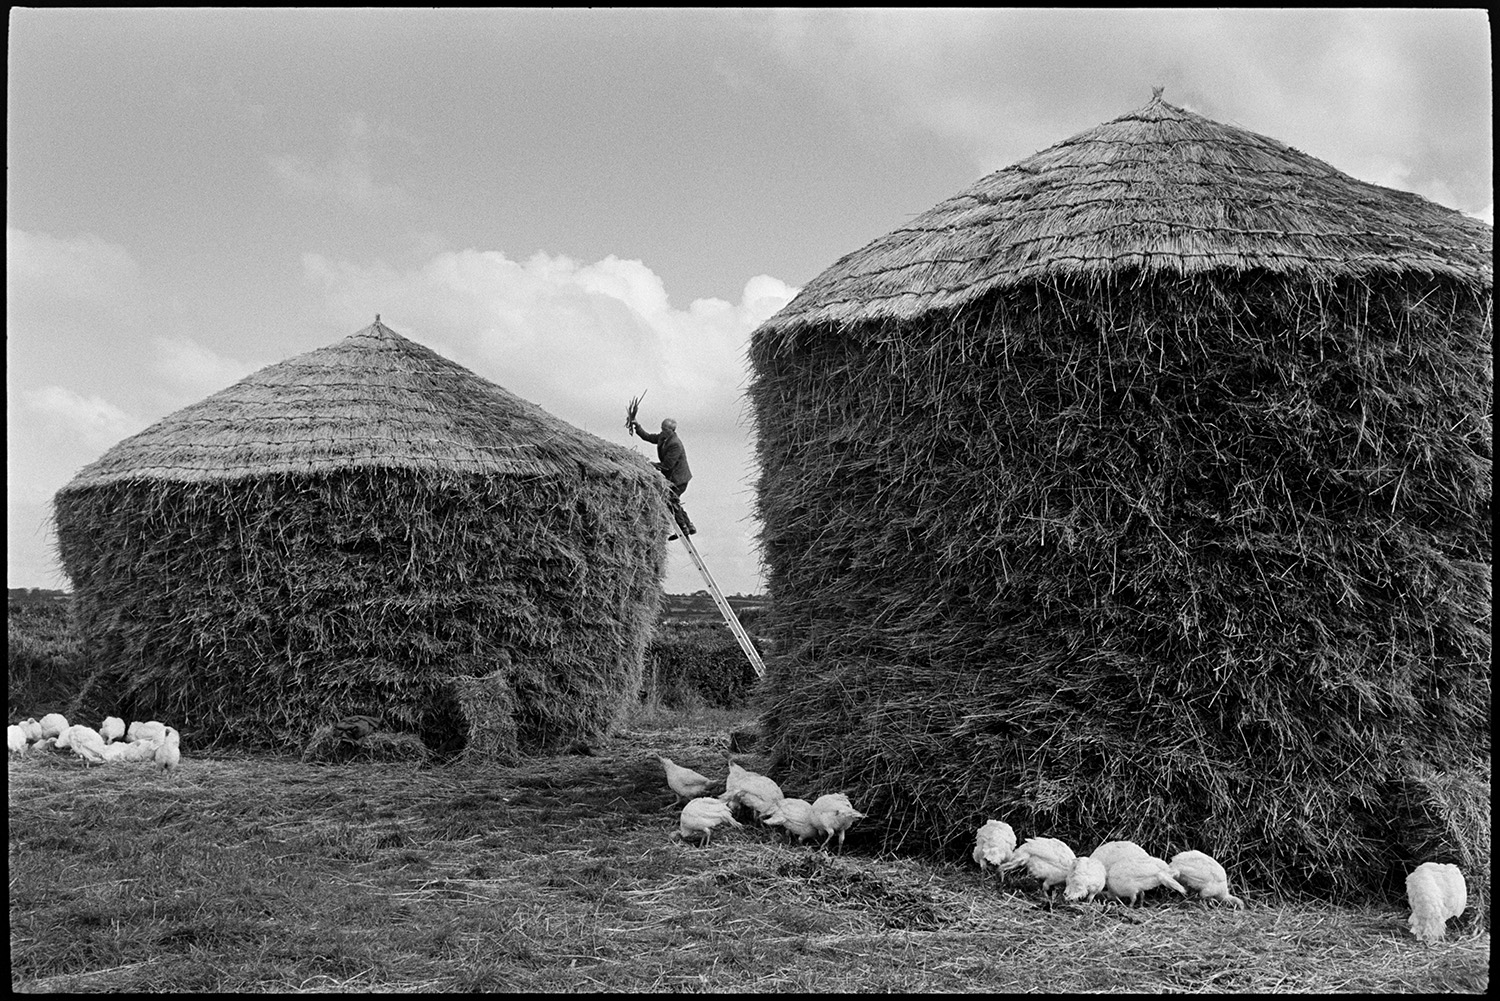 Thatcher thatching wheatrick, young turkeys.
[Bill Hammond, standing on a ladder and thatching a wheat rick in a field at Westacott, Riddlecombe. Turkeys are foraging around the base of the ricks.]